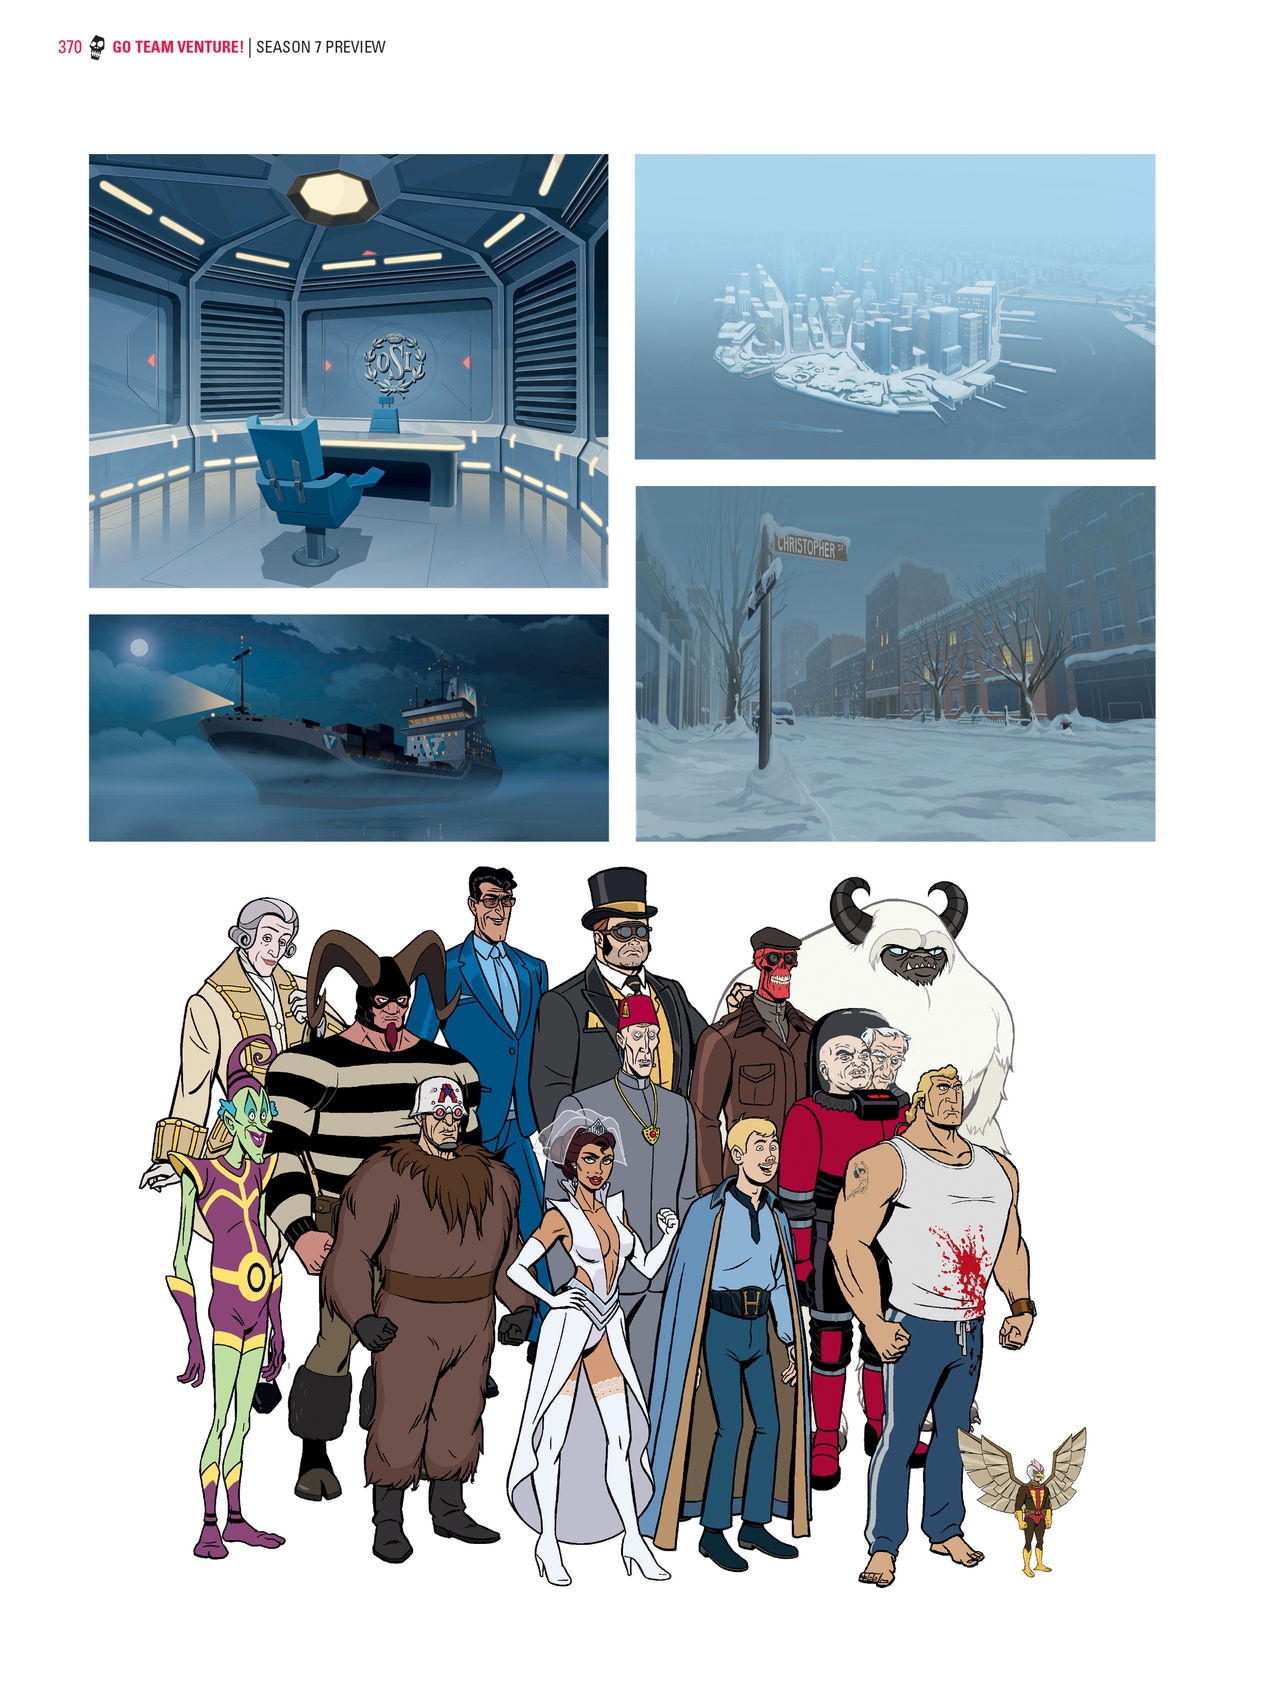 Go Team Venture! - The Art and Making of the Venture Bros 366